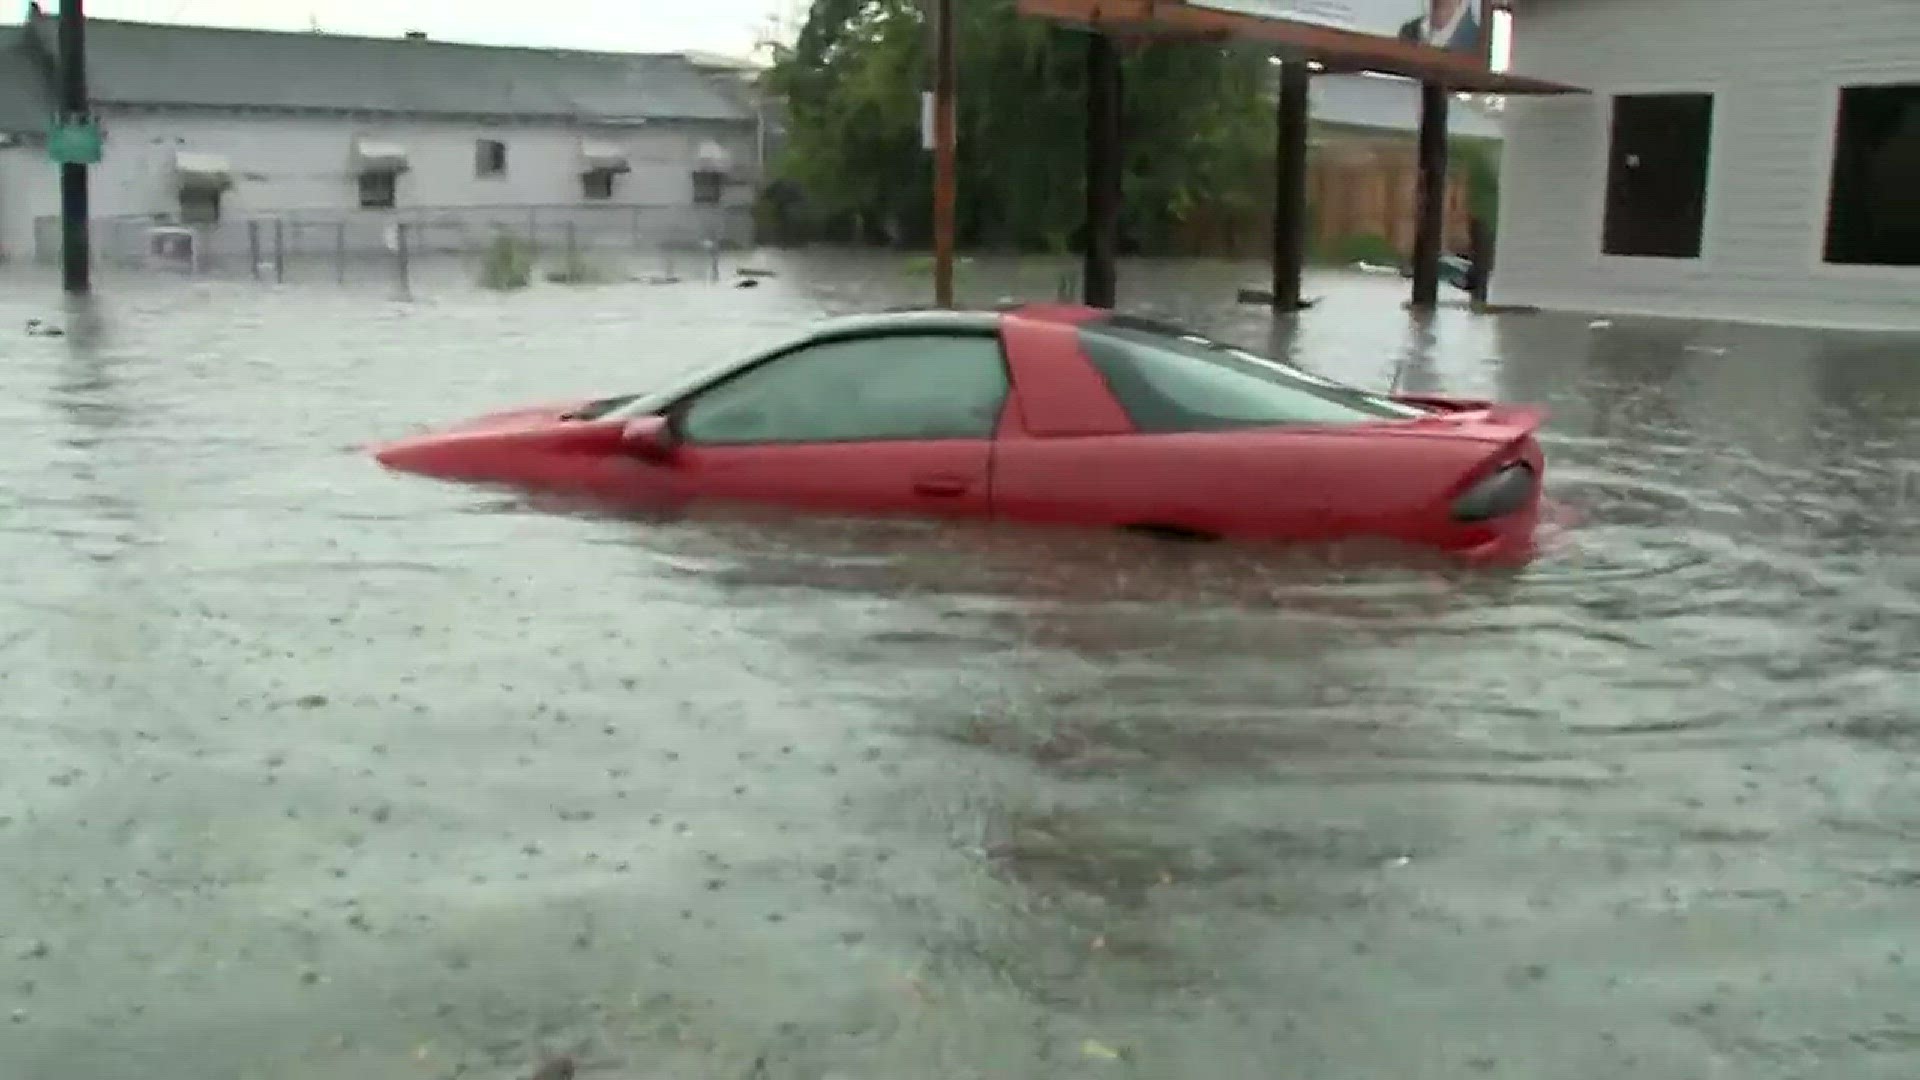 One week after the flood, residents are still frustrated with the city's pumping system.